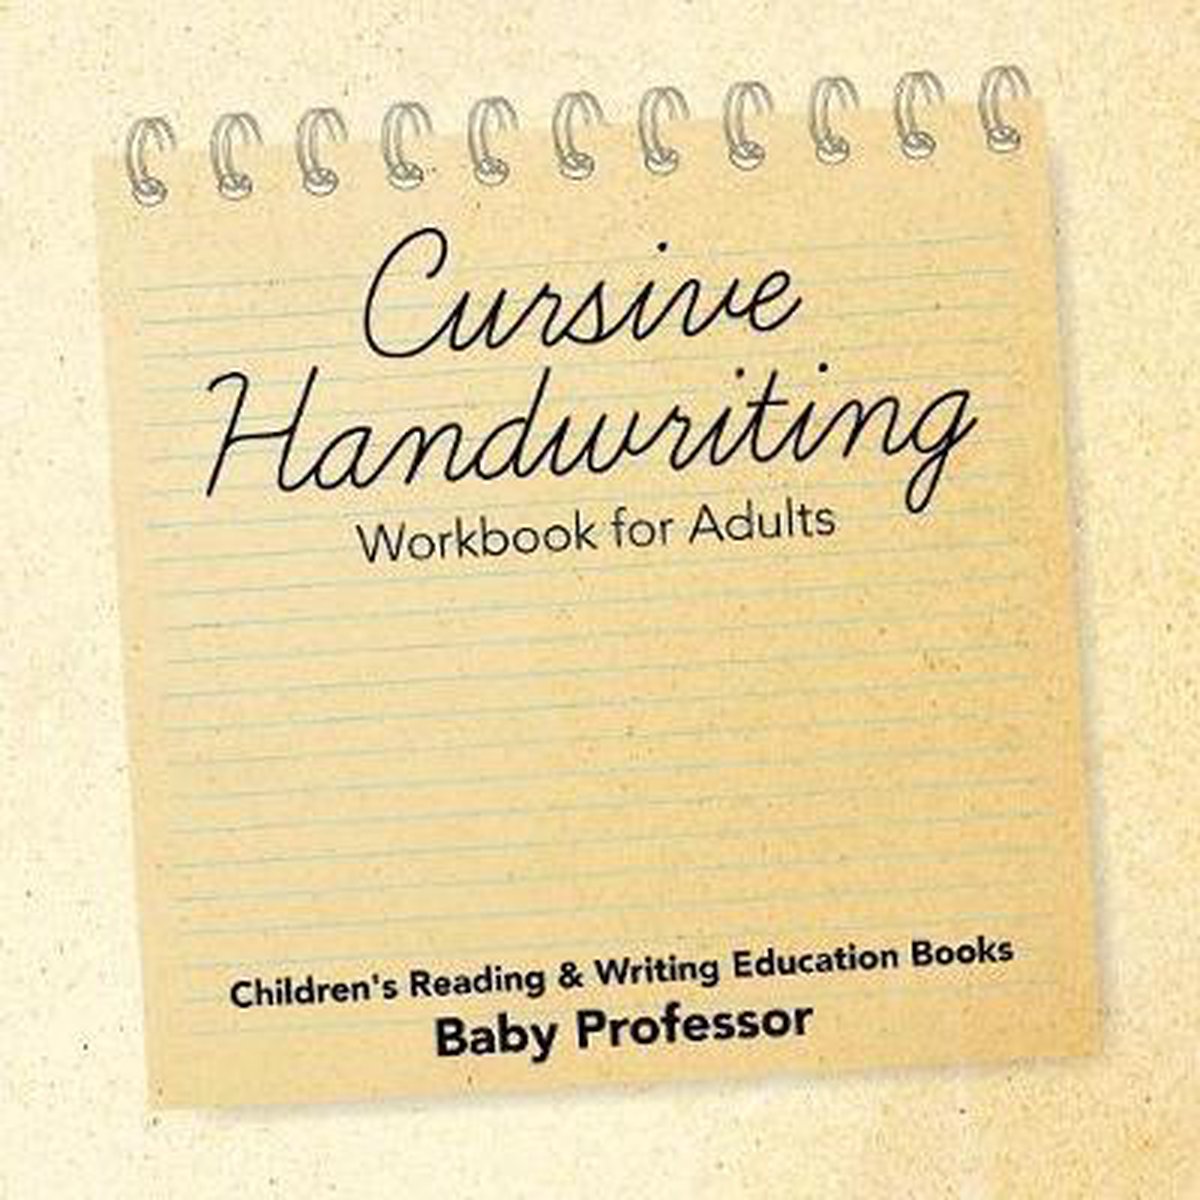 Let's Learn Cursive Handwriting Workbook for Teens: Exercises to  Learn,Practice,and Improve The Hand Lettering,Modern Calligraphy Workbook  for Adults